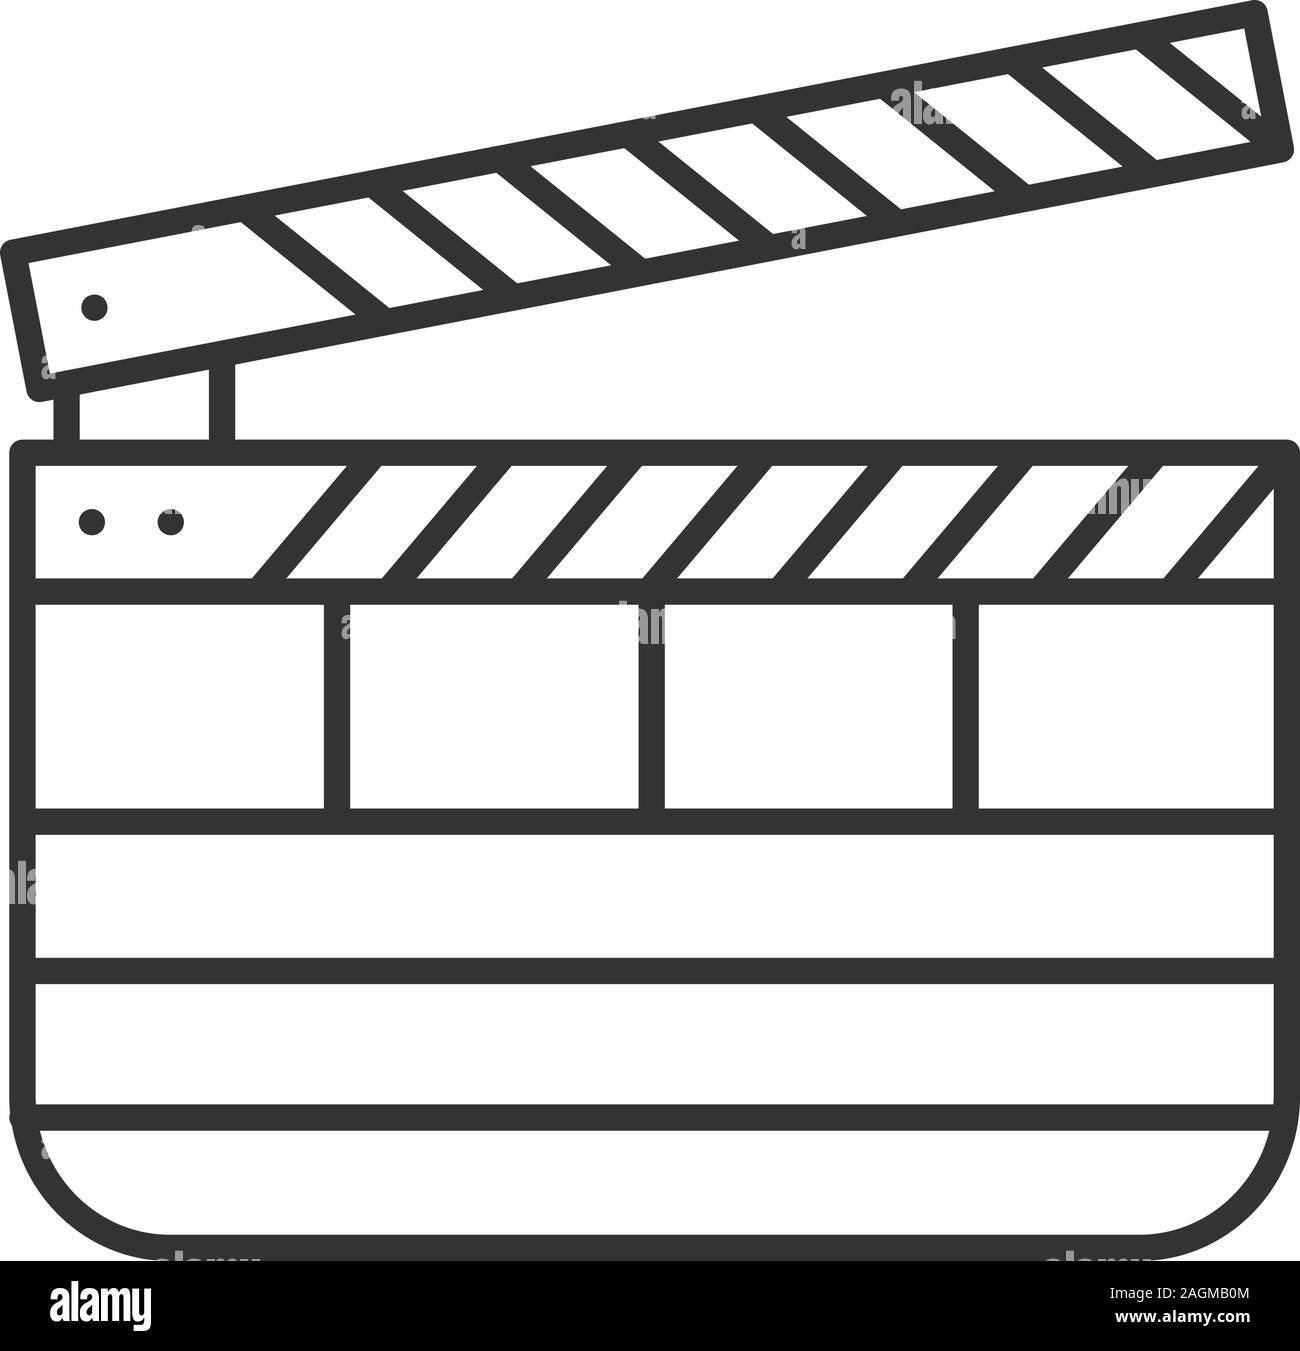 Clapperboard linear icon. Thin line illustration. Time code slate. Contour symbol. Vector isolated outline drawing Stock Vector